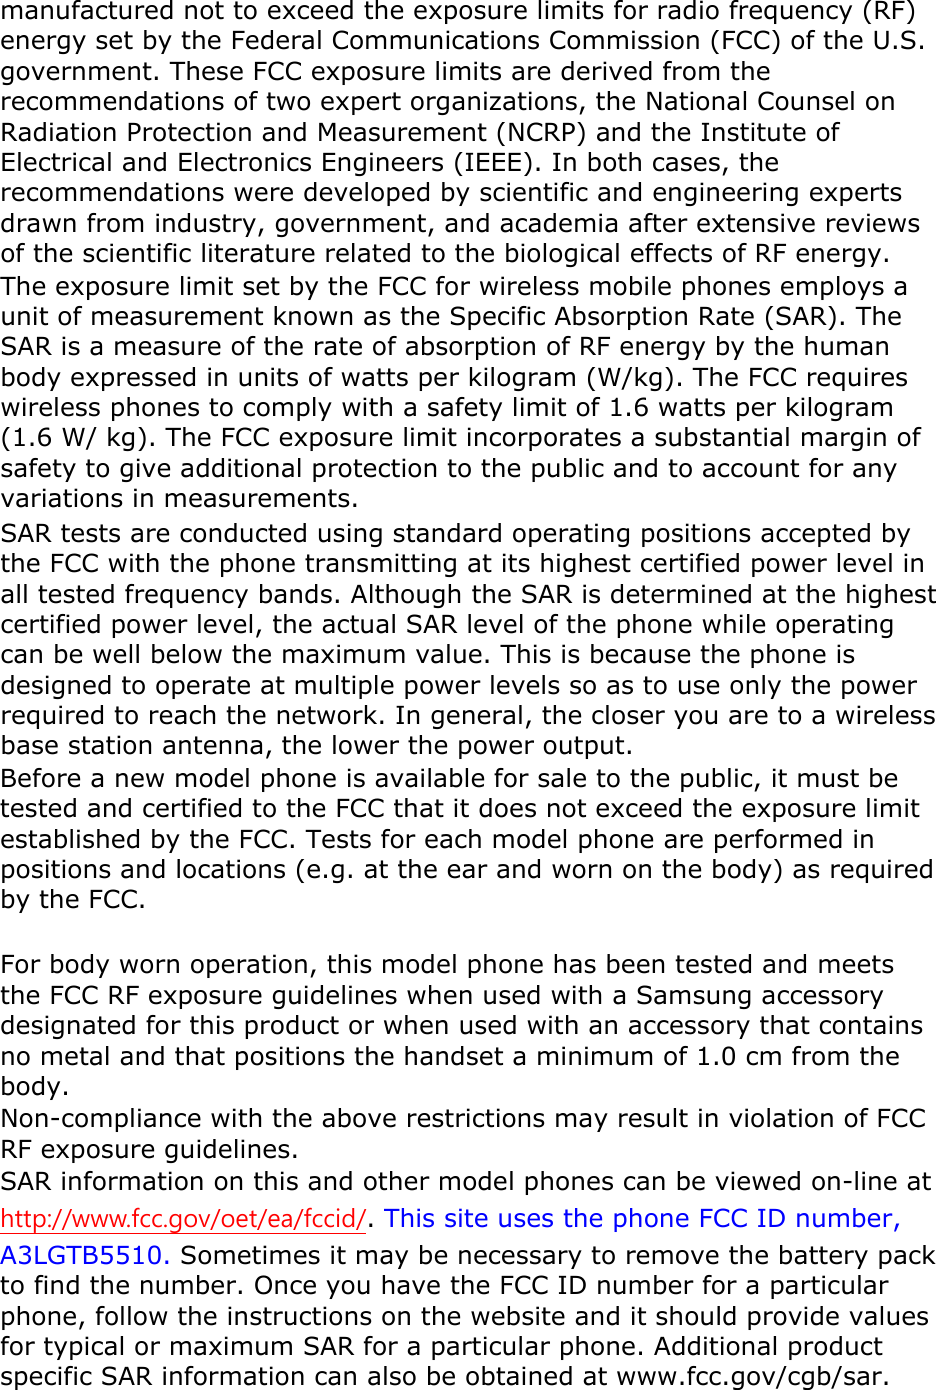 manufactured not to exceed the exposure limits for radio frequency (RF) energy set by the Federal Communications Commission (FCC) of the U.S. government. These FCC exposure limits are derived from the recommendations of two expert organizations, the National Counsel on Radiation Protection and Measurement (NCRP) and the Institute of Electrical and Electronics Engineers (IEEE). In both cases, the recommendations were developed by scientific and engineering experts drawn from industry, government, and academia after extensive reviews of the scientific literature related to the biological effects of RF energy.The exposure limit set by the FCC for wireless mobile phones employs a unit of measurement known as the Specific Absorption Rate (SAR). The SAR is a measure of the rate of absorption of RF energy by the human body expressed in units of watts per kilogram (W/kg). The FCC requires wireless phones to comply with a safety limit of 1.6 watts per kilogram (1.6 W/ kg). The FCC exposure limit incorporates a substantial margin of safety to give additional protection to the public and to account for any variations in measurements.SAR tests are conducted using standard operating positions accepted by the FCC with the phone transmitting at its highest certified power level in all tested frequency bands. Although the SAR is determined at the highest certified power level, the actual SAR level of the phone while operating can be well below the maximum value. This is because the phone is designed to operate at multiple power levels so as to use only the power required to reach the network. In general, the closer you are to a wireless base station antenna, the lower the power output. Before a new model phone is available for sale to the public, it must be tested and certified to the FCC that it does not exceed the exposure limit established by the FCC. Tests for each model phone are performed in positions and locations (e.g. at the ear and worn on the body) as required by the FCC.     For body worn operation, this model phone has been tested and meets the FCC RF exposure guidelines when used with a Samsung accessory designated for this product or when used with an accessory that contains no metal and that positions the handset a minimum of 1.0 cm from the body.Non-compliance with the above restrictions may result in violation of FCC RF exposure guidelines. SAR information on this and other model phones can be viewed on-line at http://www.fcc.gov/oet/ea/fccid/.This site uses the phone FCC ID number, A3LGTB5510. Sometimes it may be necessary to remove the battery pack to find the number. Once you have the FCC ID number for a particular phone, follow the instructions on the website and it should provide values for typical or maximum SAR for a particular phone. Additional product specific SAR information can also be obtained at www.fcc.gov/cgb/sar. 